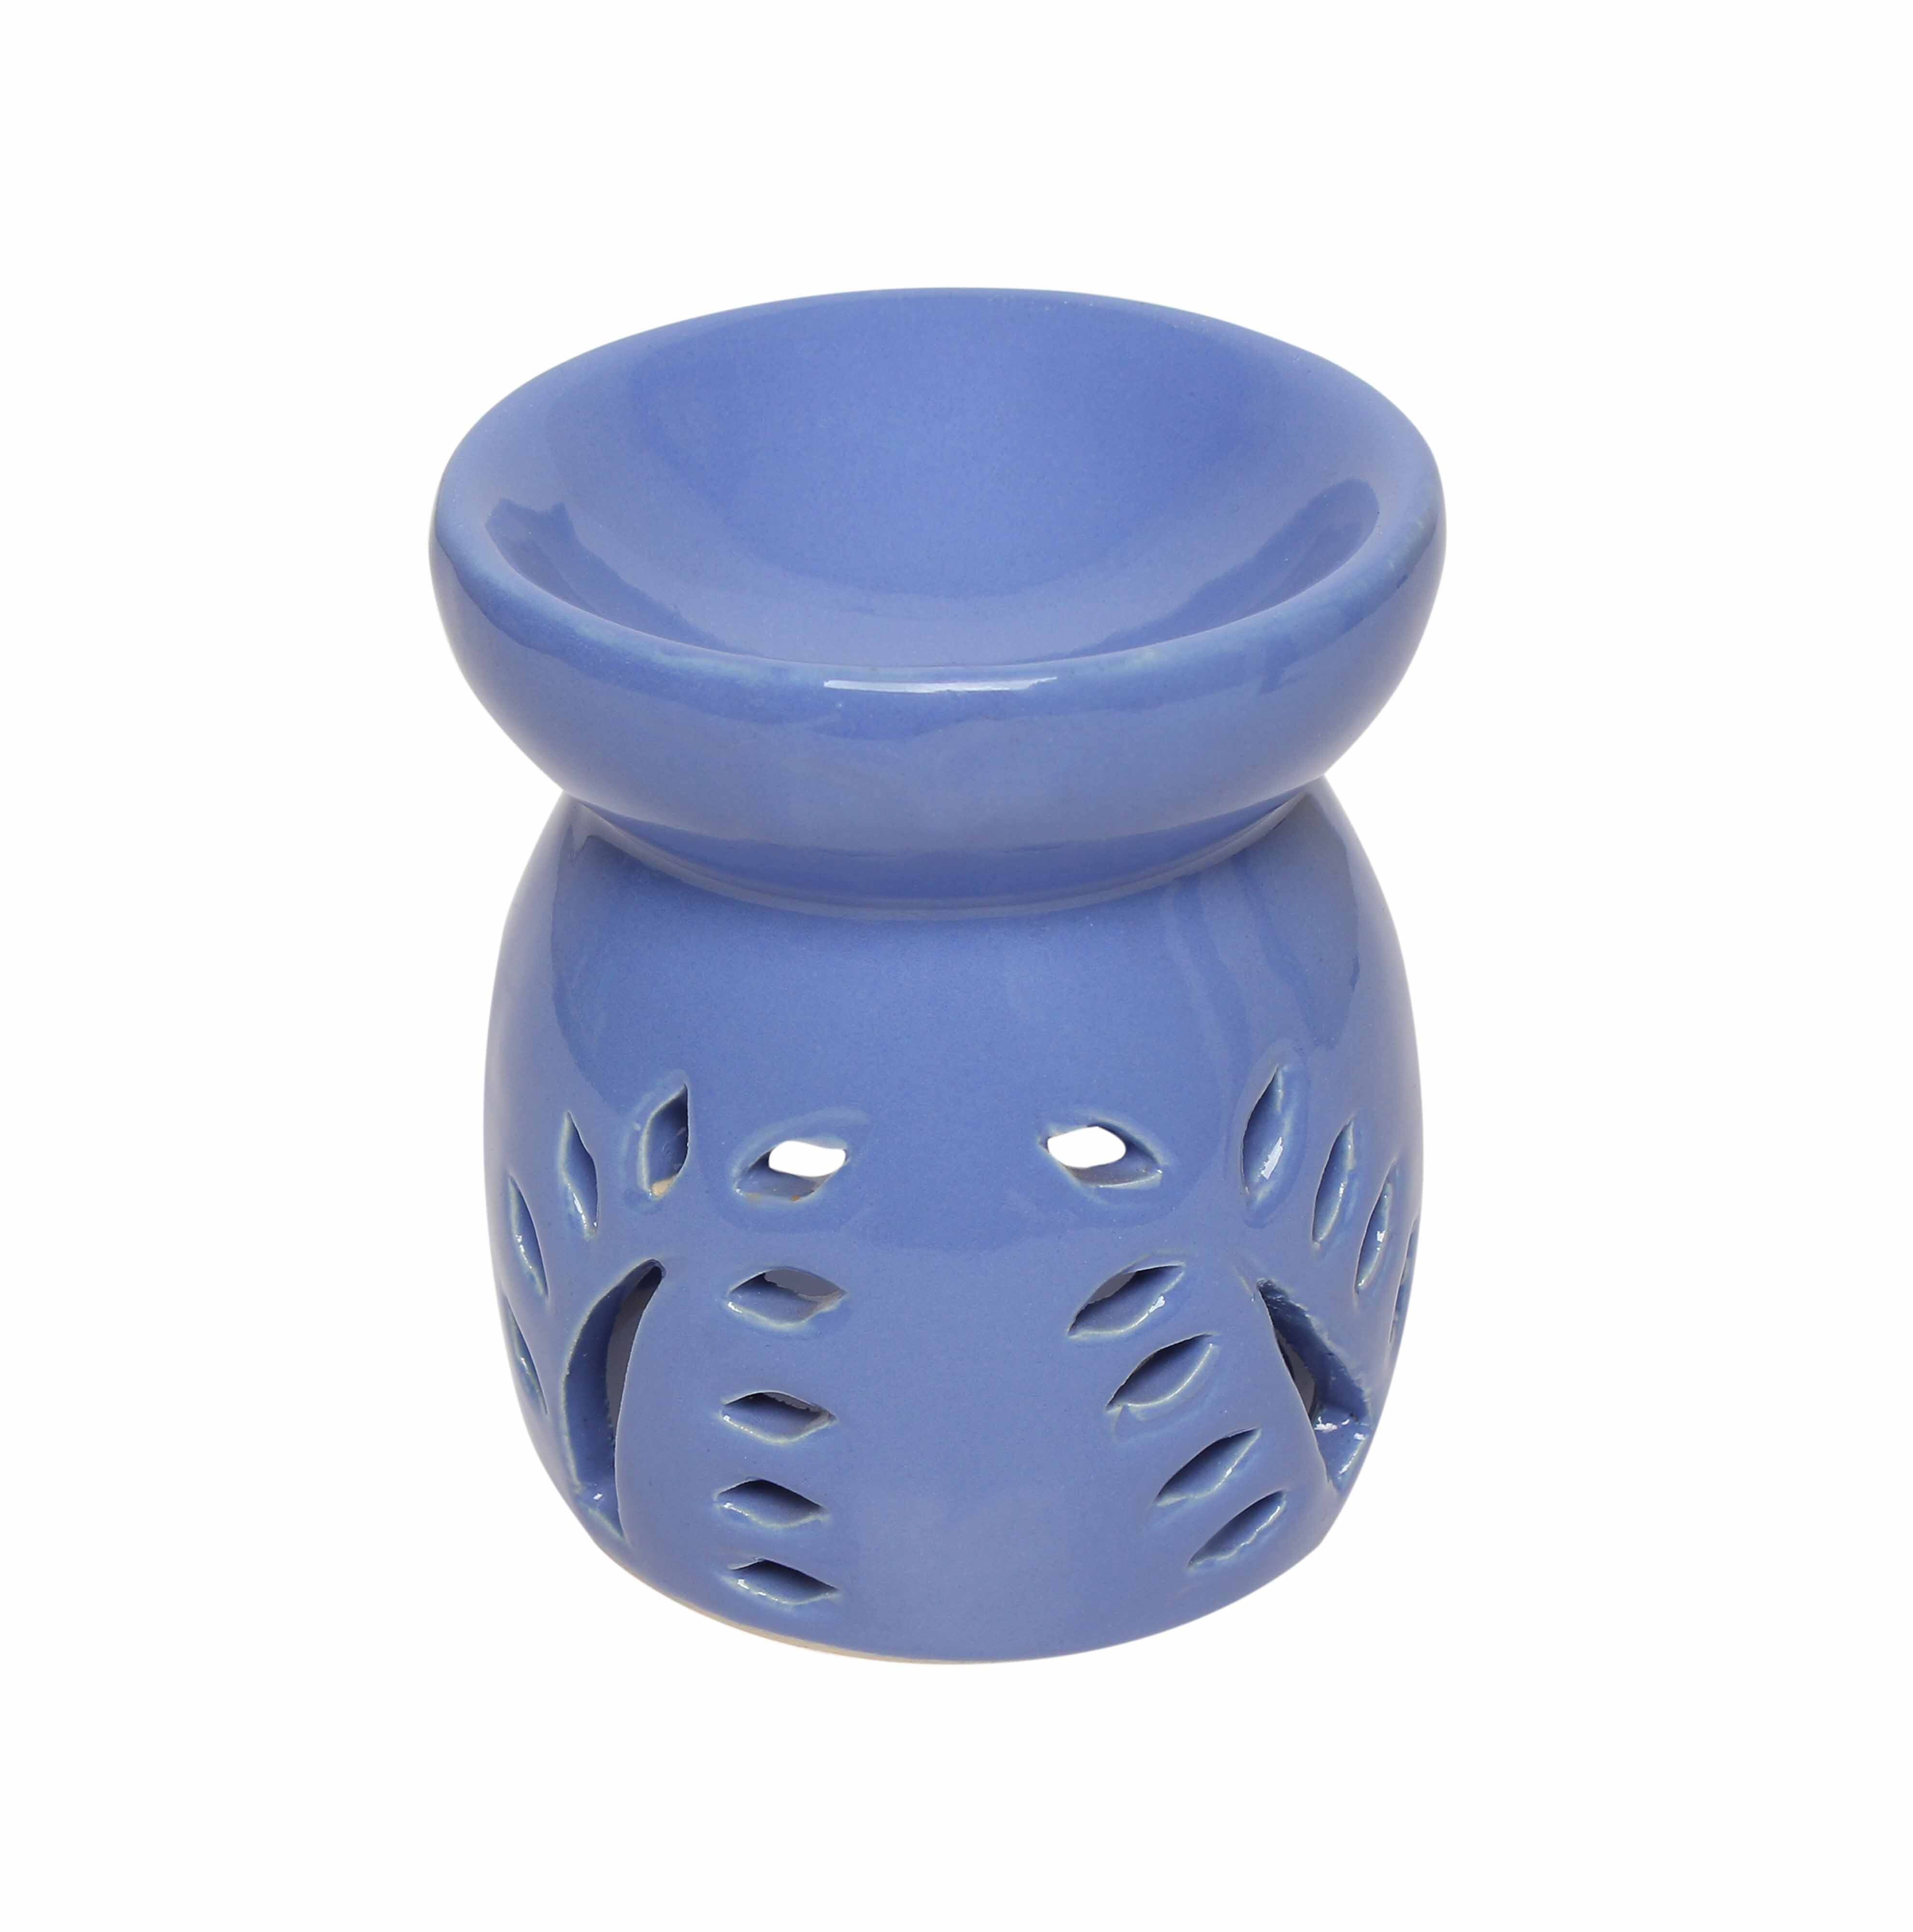 Asian Aura Ceramic Aromatic Oil Diffuser with 2 oil bottles AA-CB-0029Pur